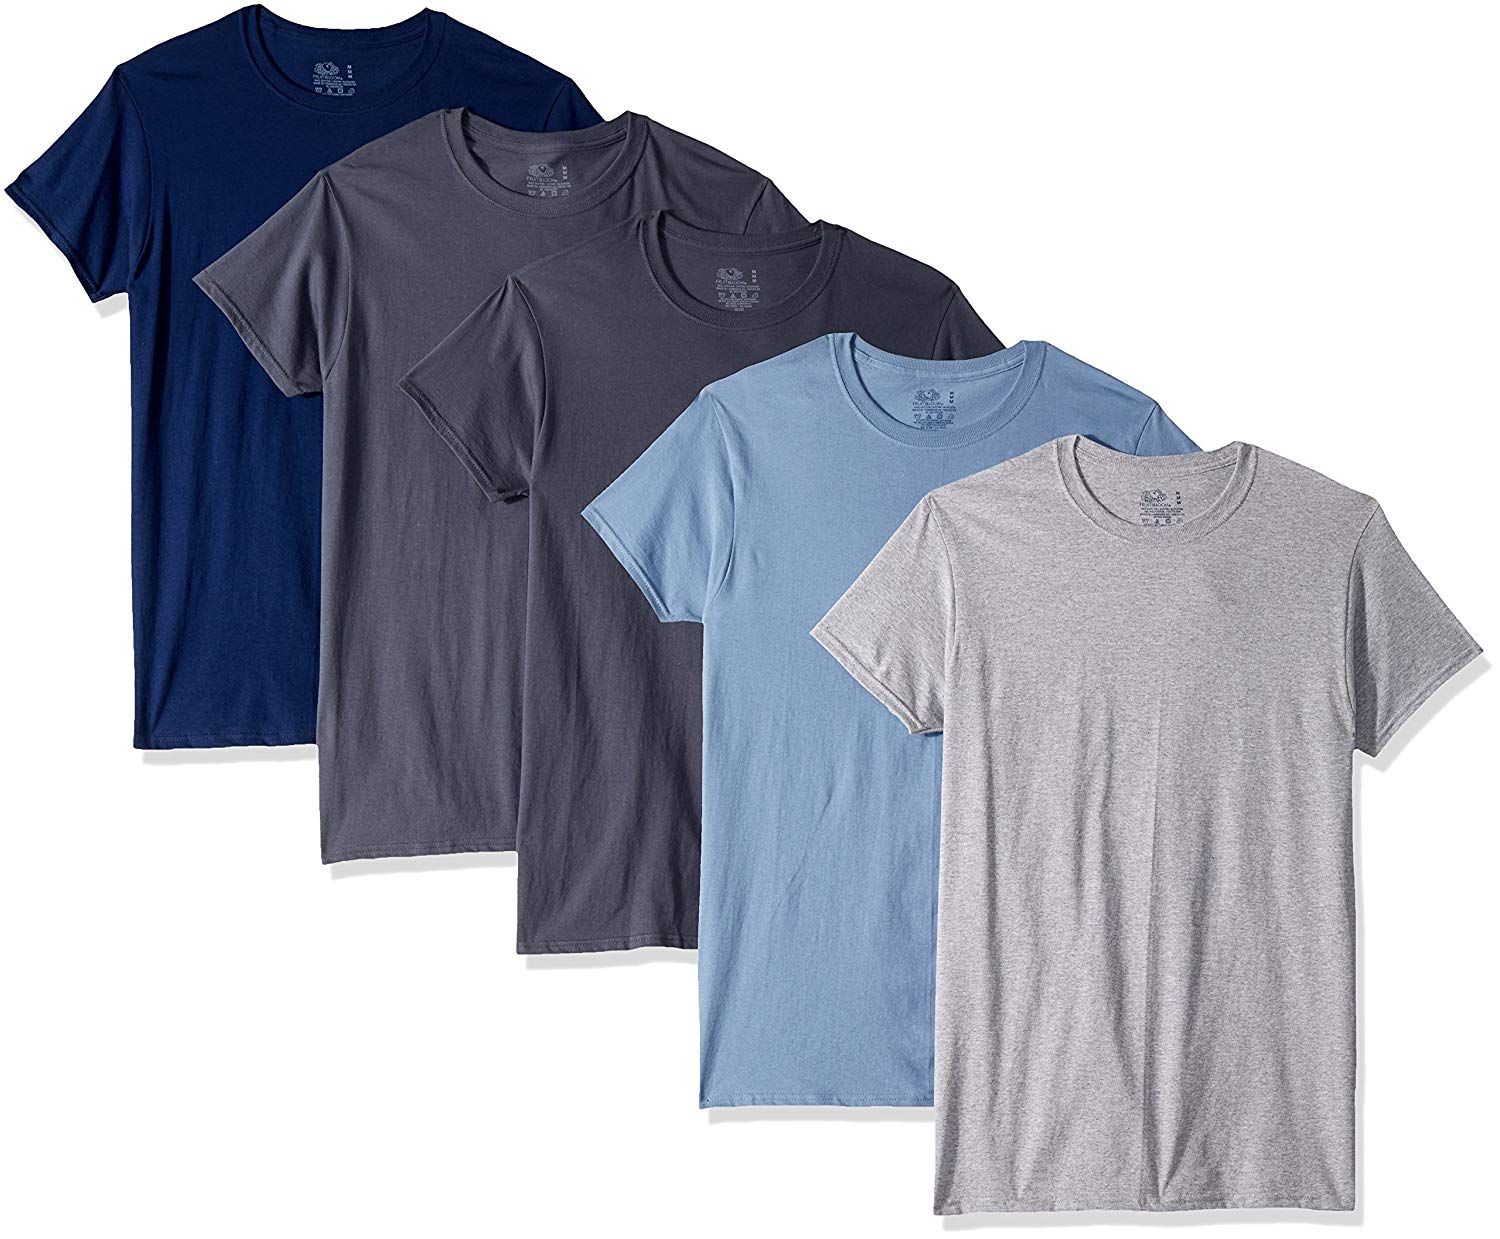 Fruit of the Loom Men's Crew Neck T-Shirt Multipack,, MultiColor, Size ...